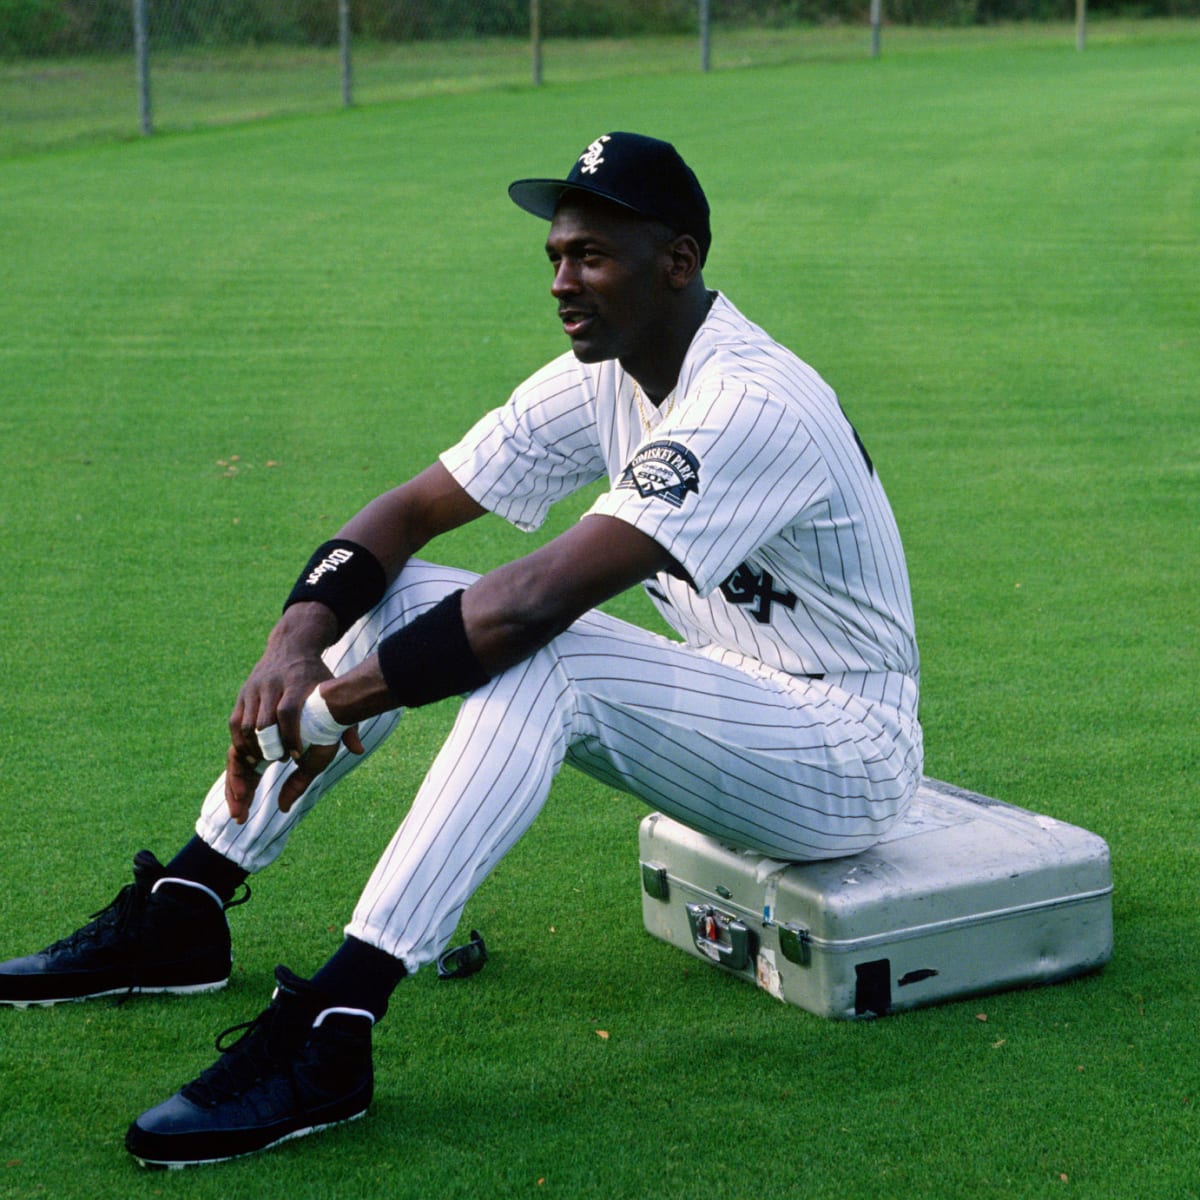 Michael Jordan plays right field for the White Sox 